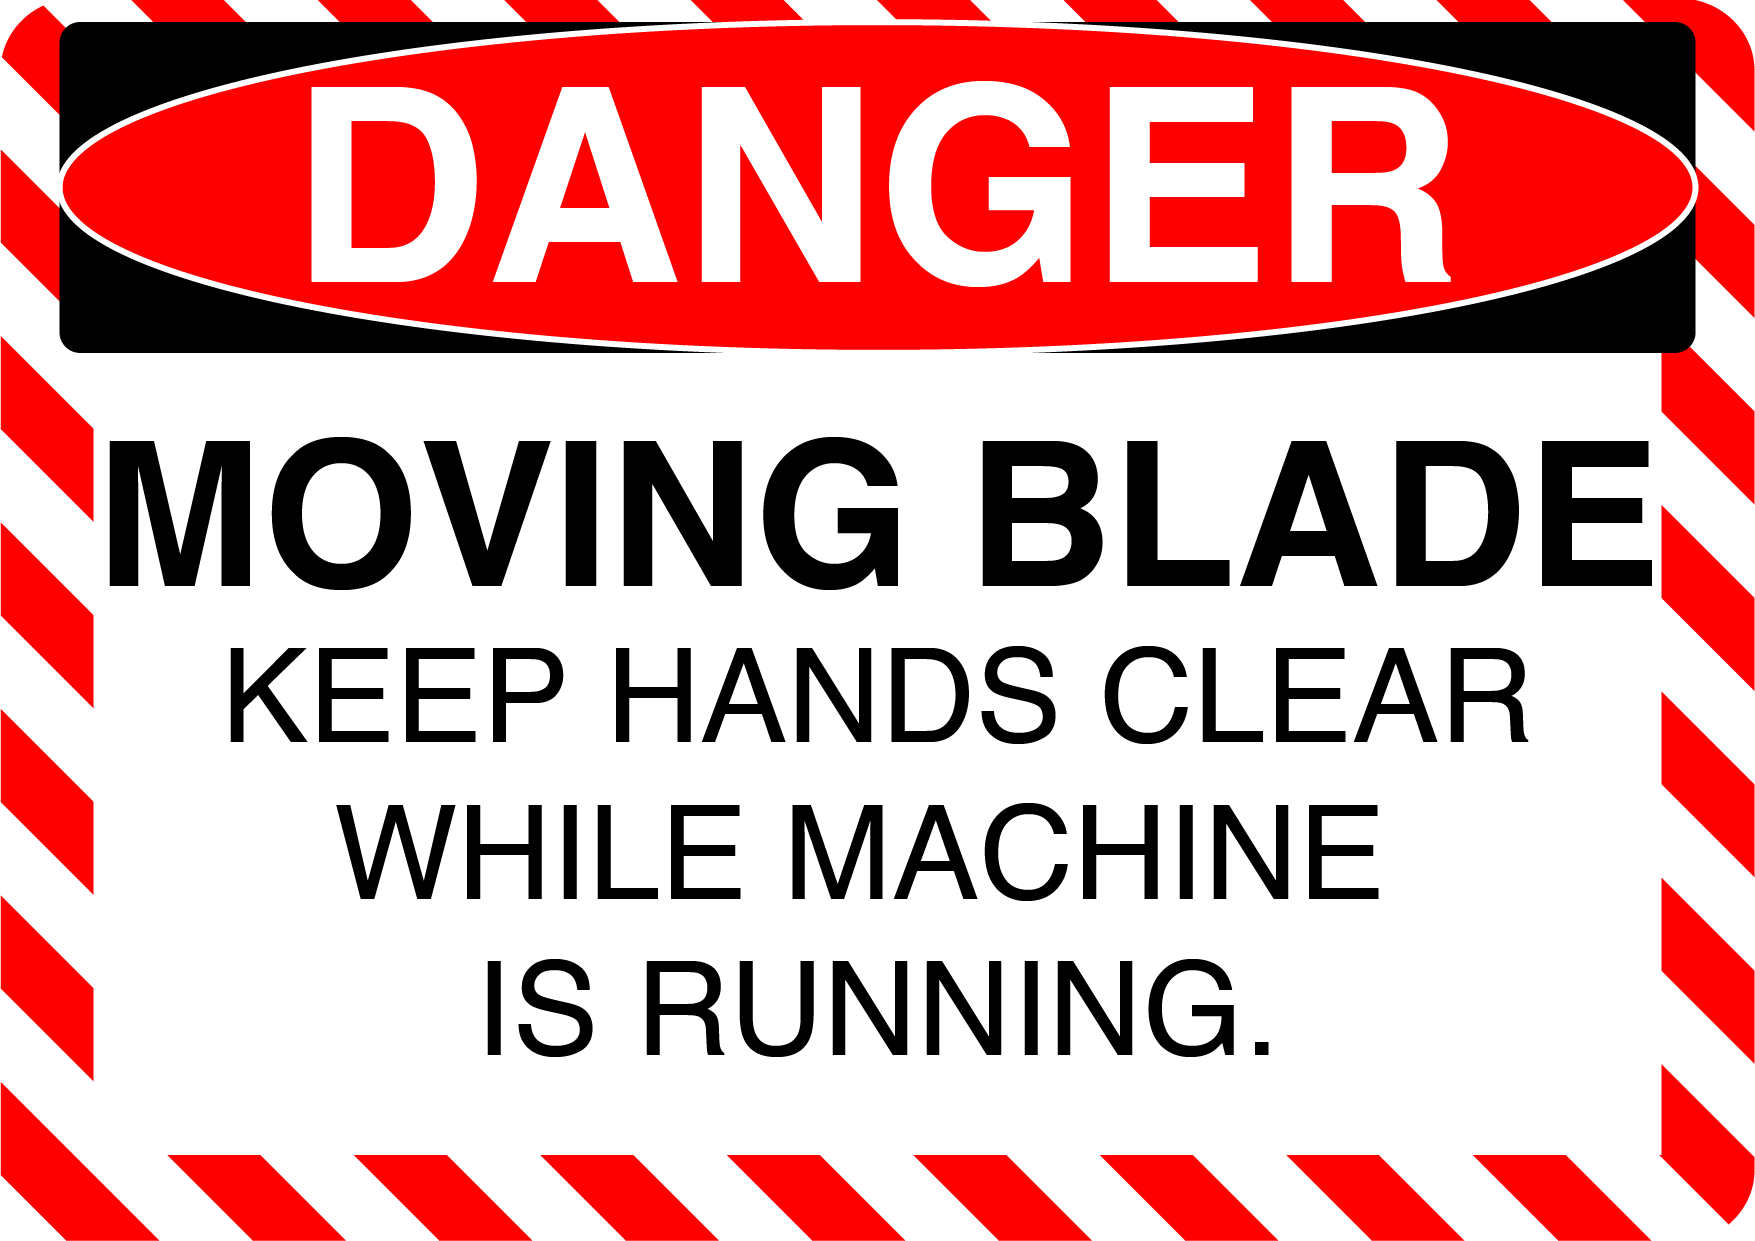 Danger "Moving Blade, Keep Hands Clear While Machine is Running" Durable Matte Laminated Vinyl Floor Sign- Various Sizes Available